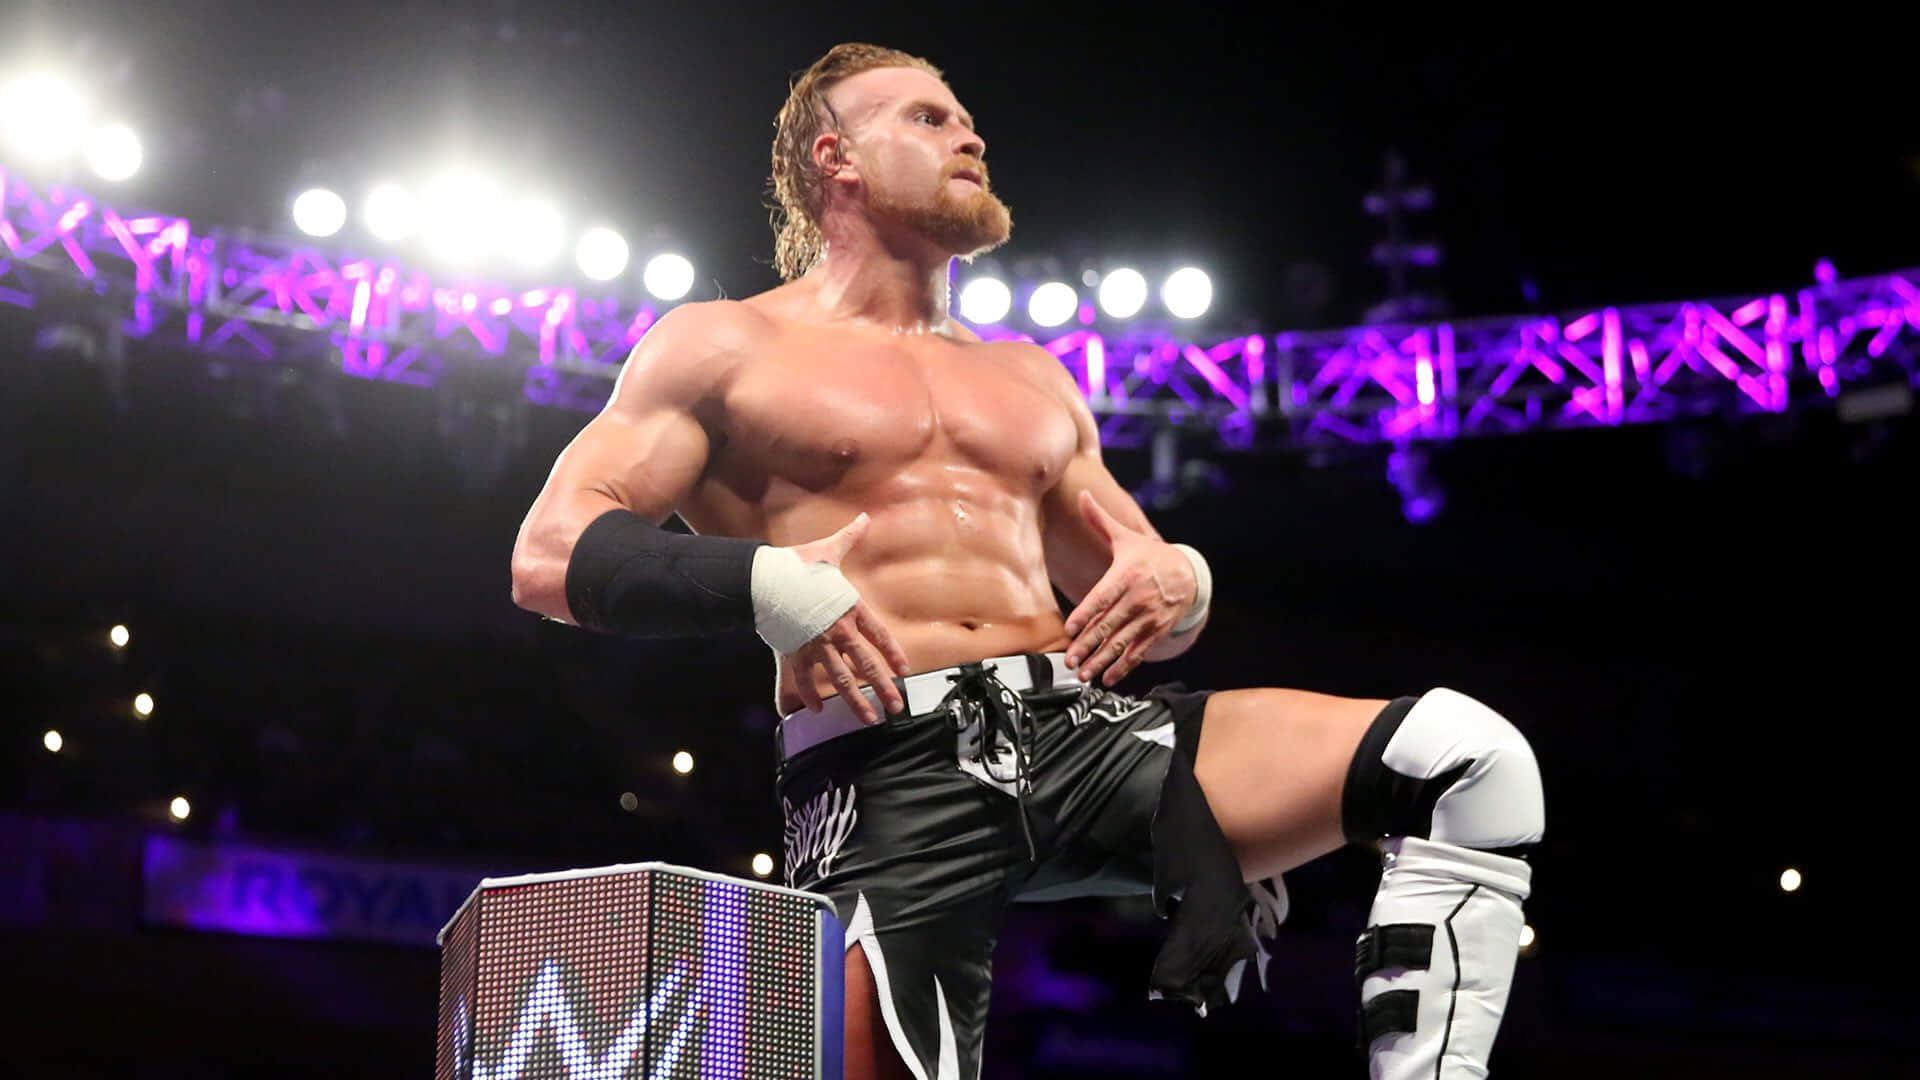 Buddy Murphy striking a powerful pose at WWE 205 Live event. Wallpaper